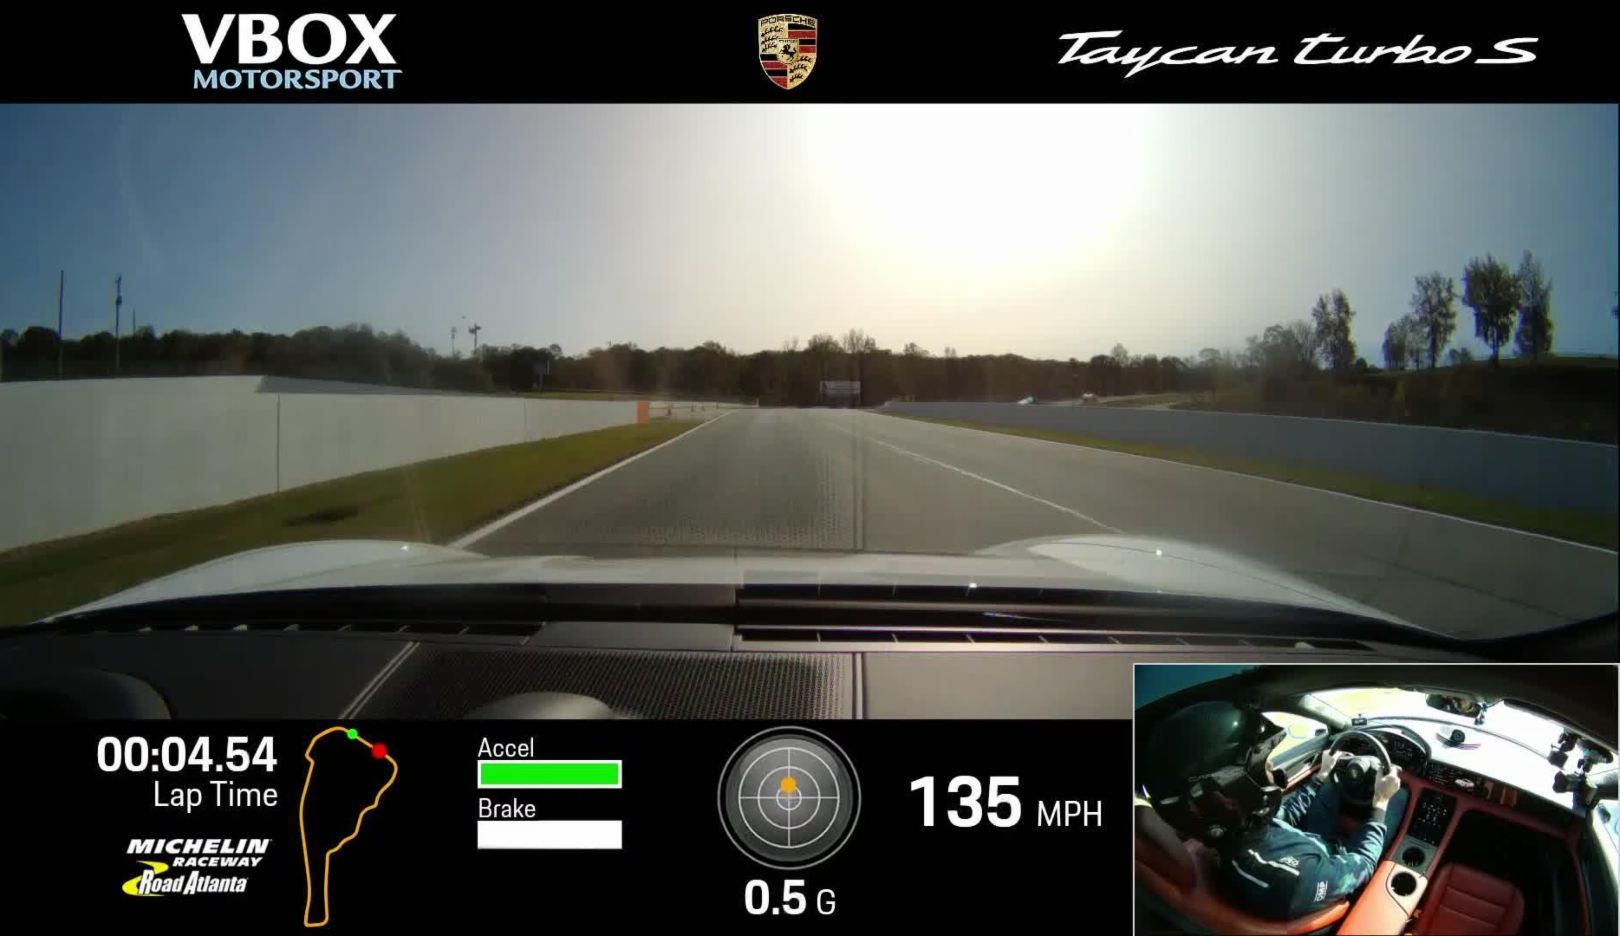 On-board video of the record lap